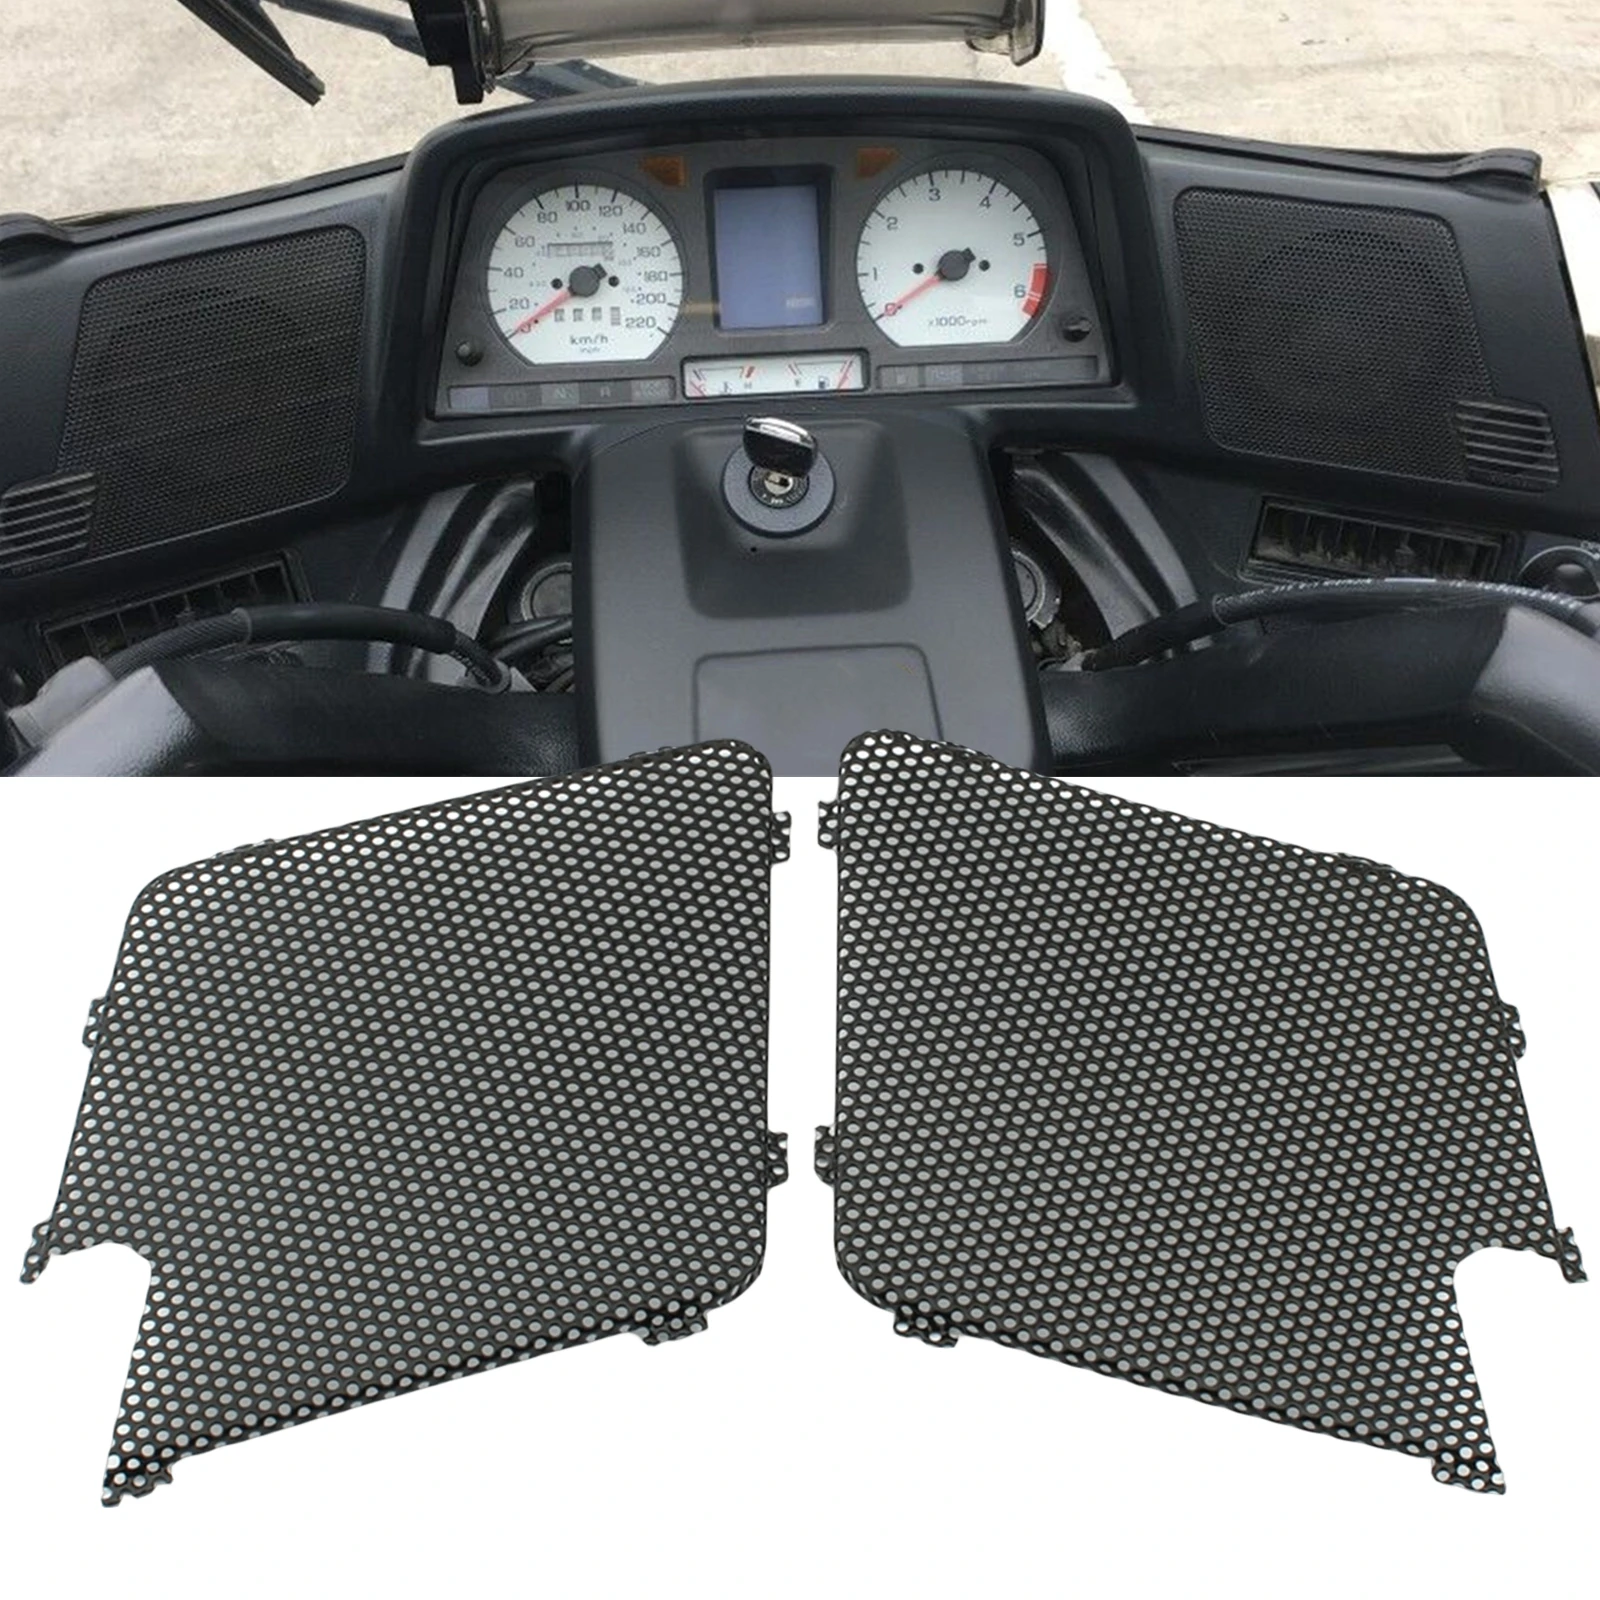 

Motorcycle Audio Speaker Cover Mesh Replacement Grid For Honda GL1500 1988-2000